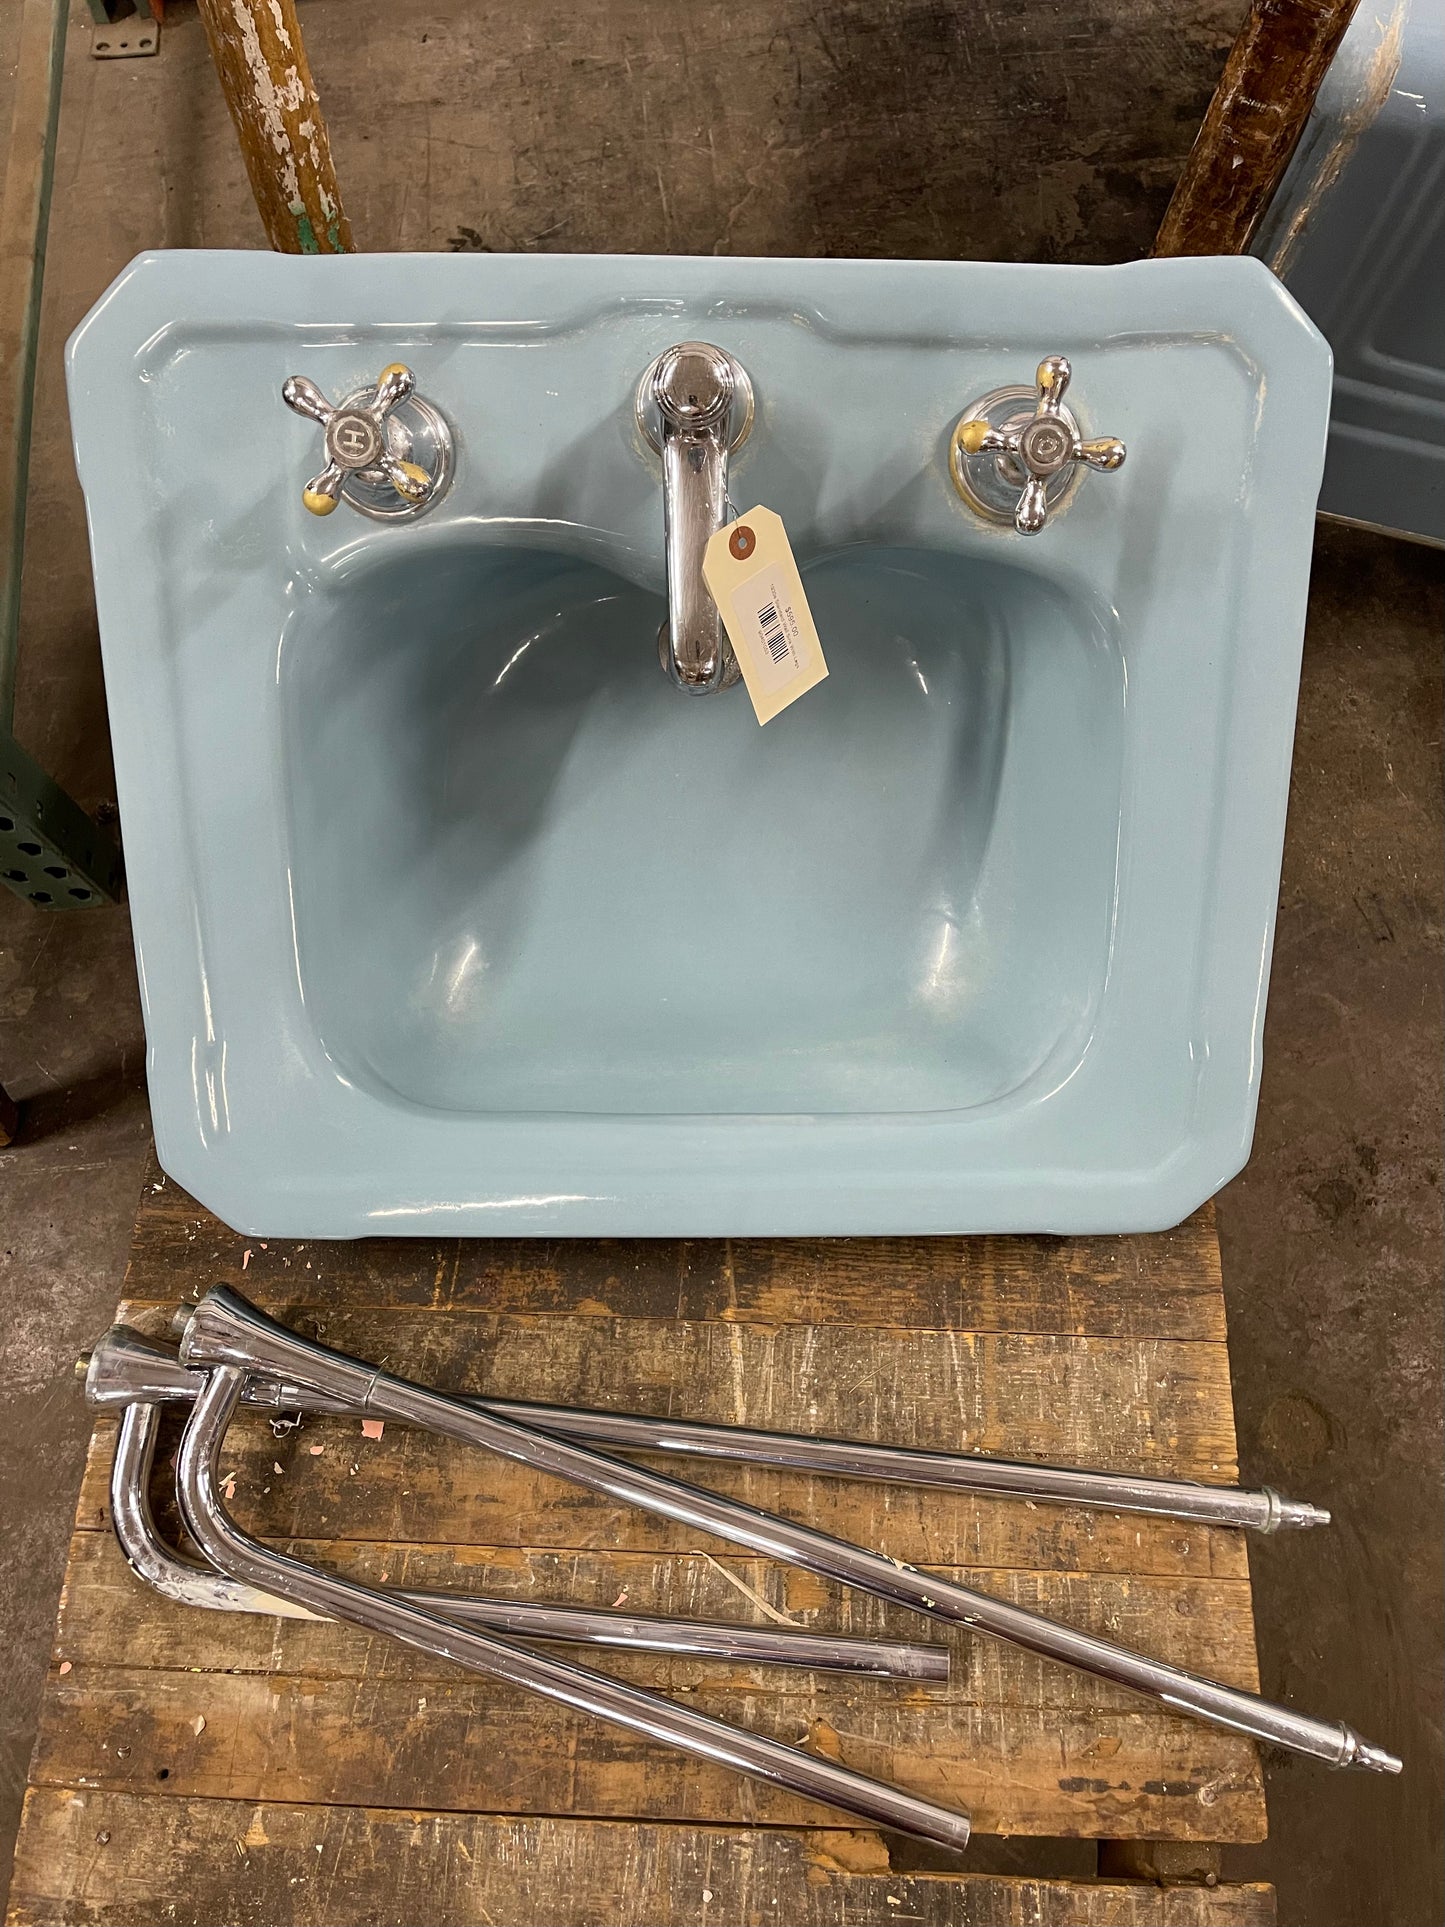 1930s Standard Wall Sink With Legs